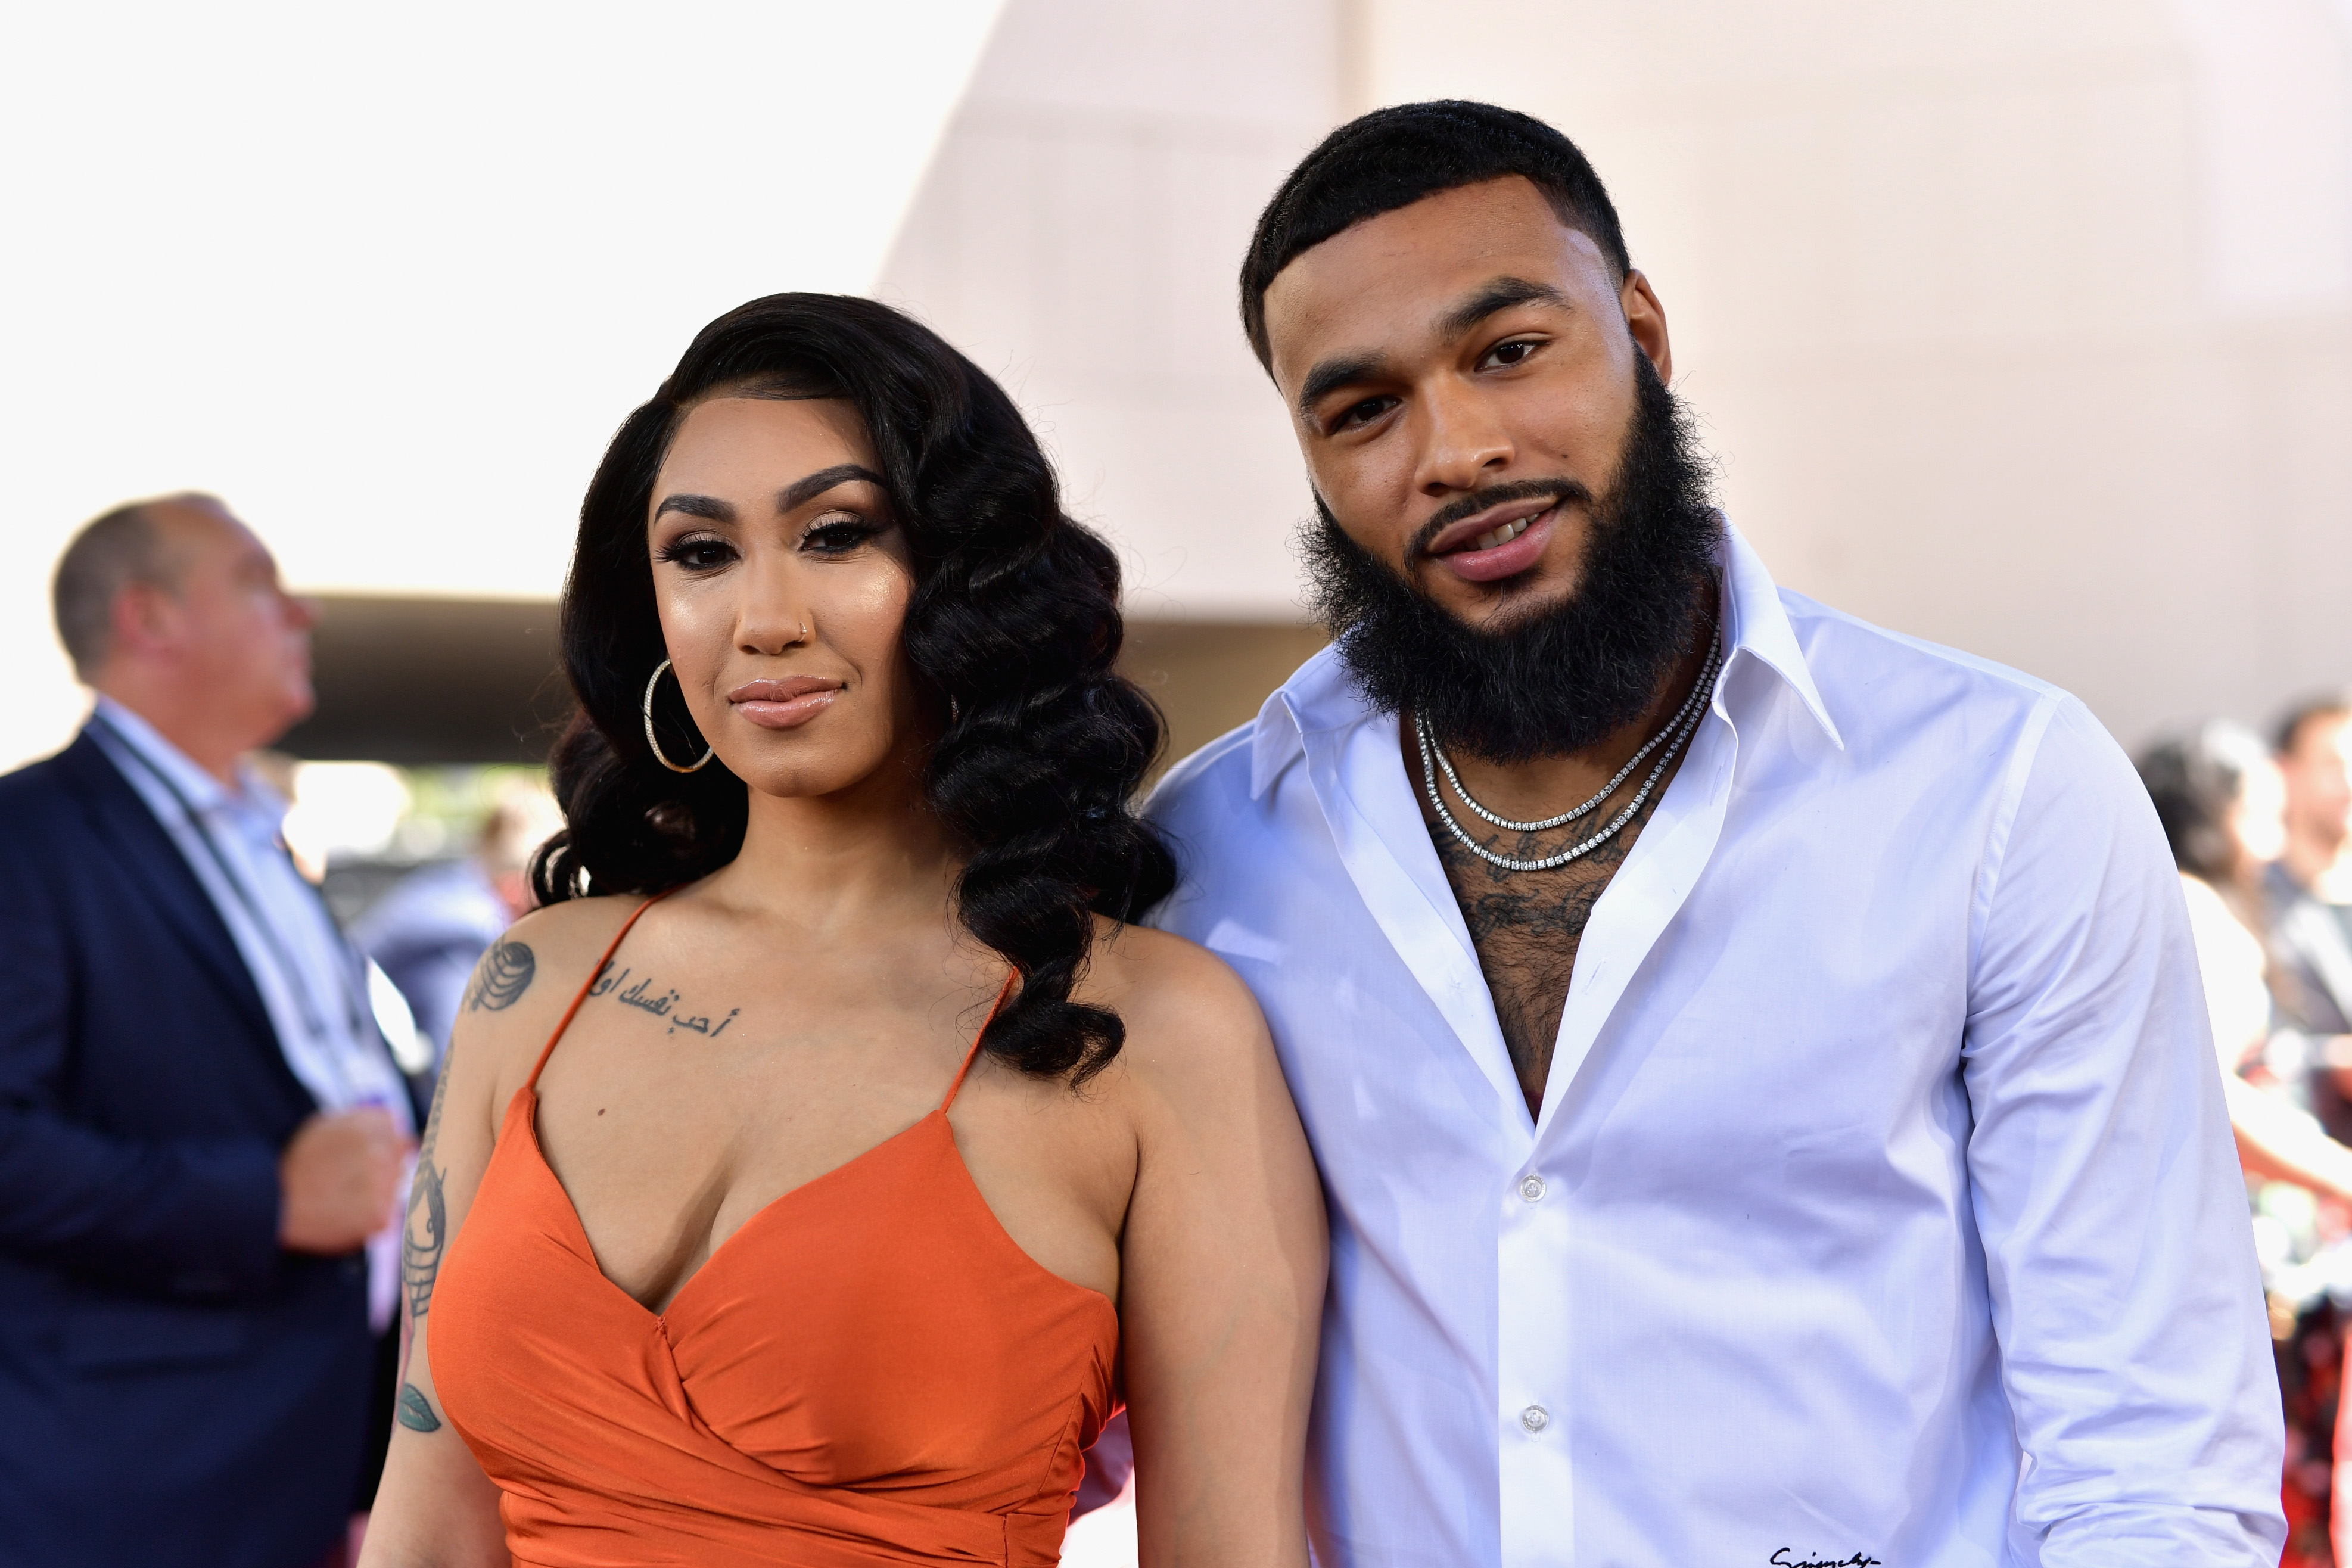 Queen Naija Defends Clarence White After He Tweets He’s Proud Of Son’s Package